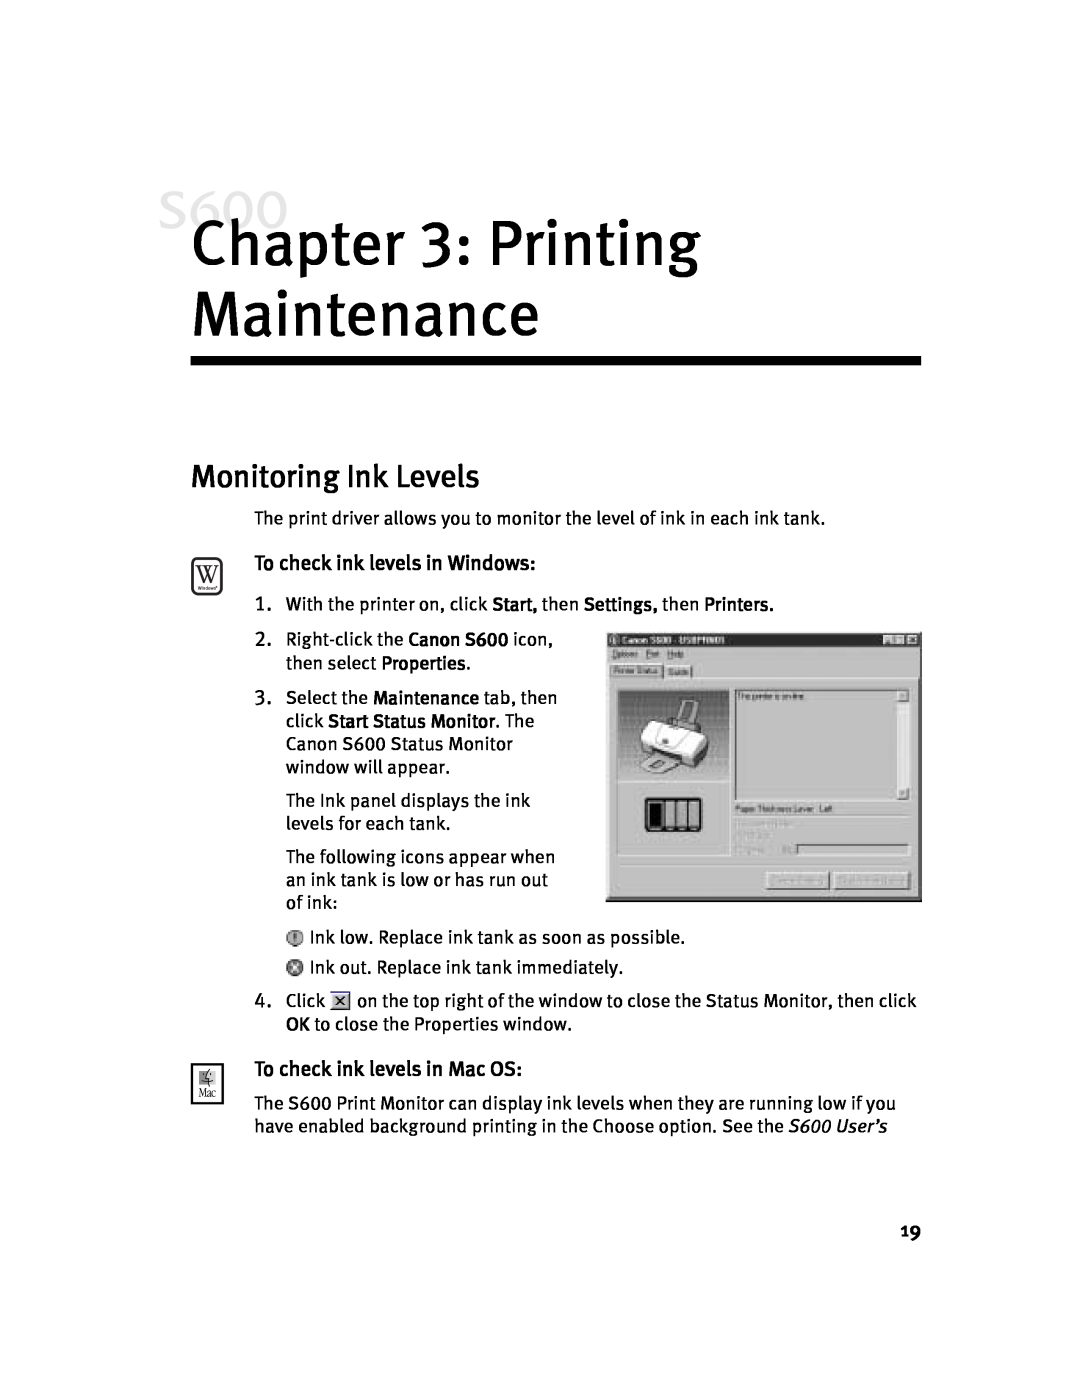 Canon S600 Printing Maintenance, Monitoring Ink Levels, To check ink levels in Windows, To check ink levels in Mac OS 